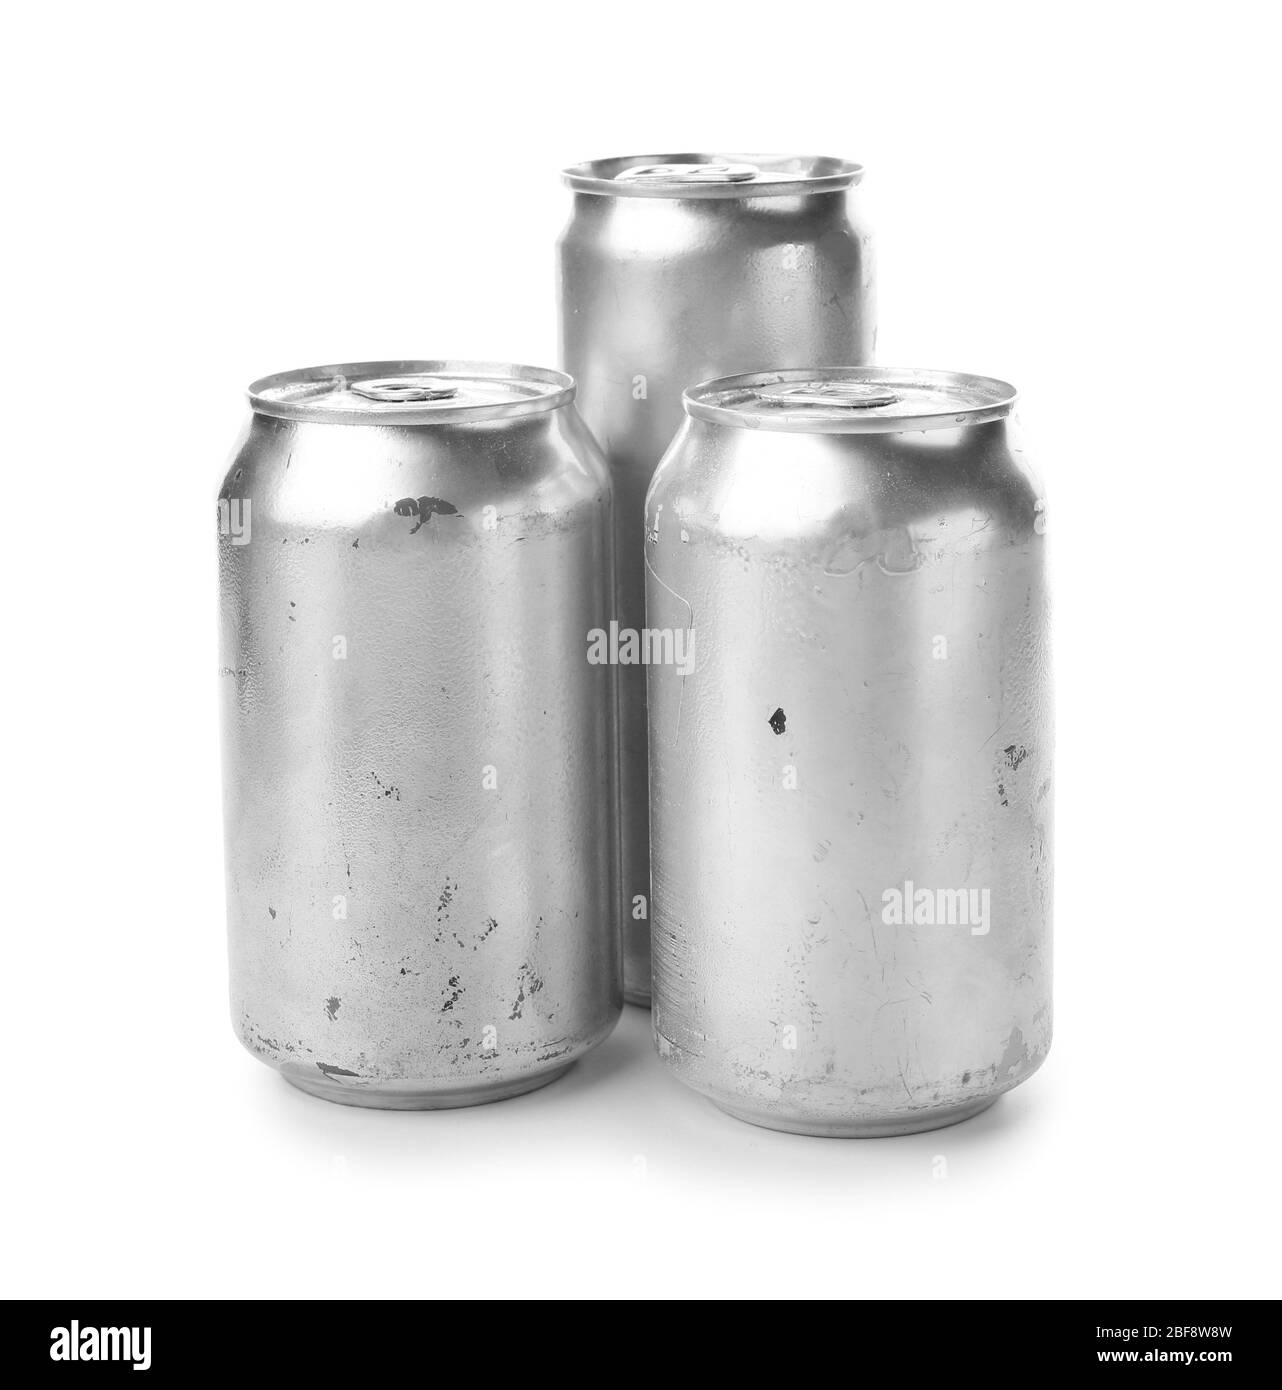 Metal cans on white background. Recycling concept Stock Photo